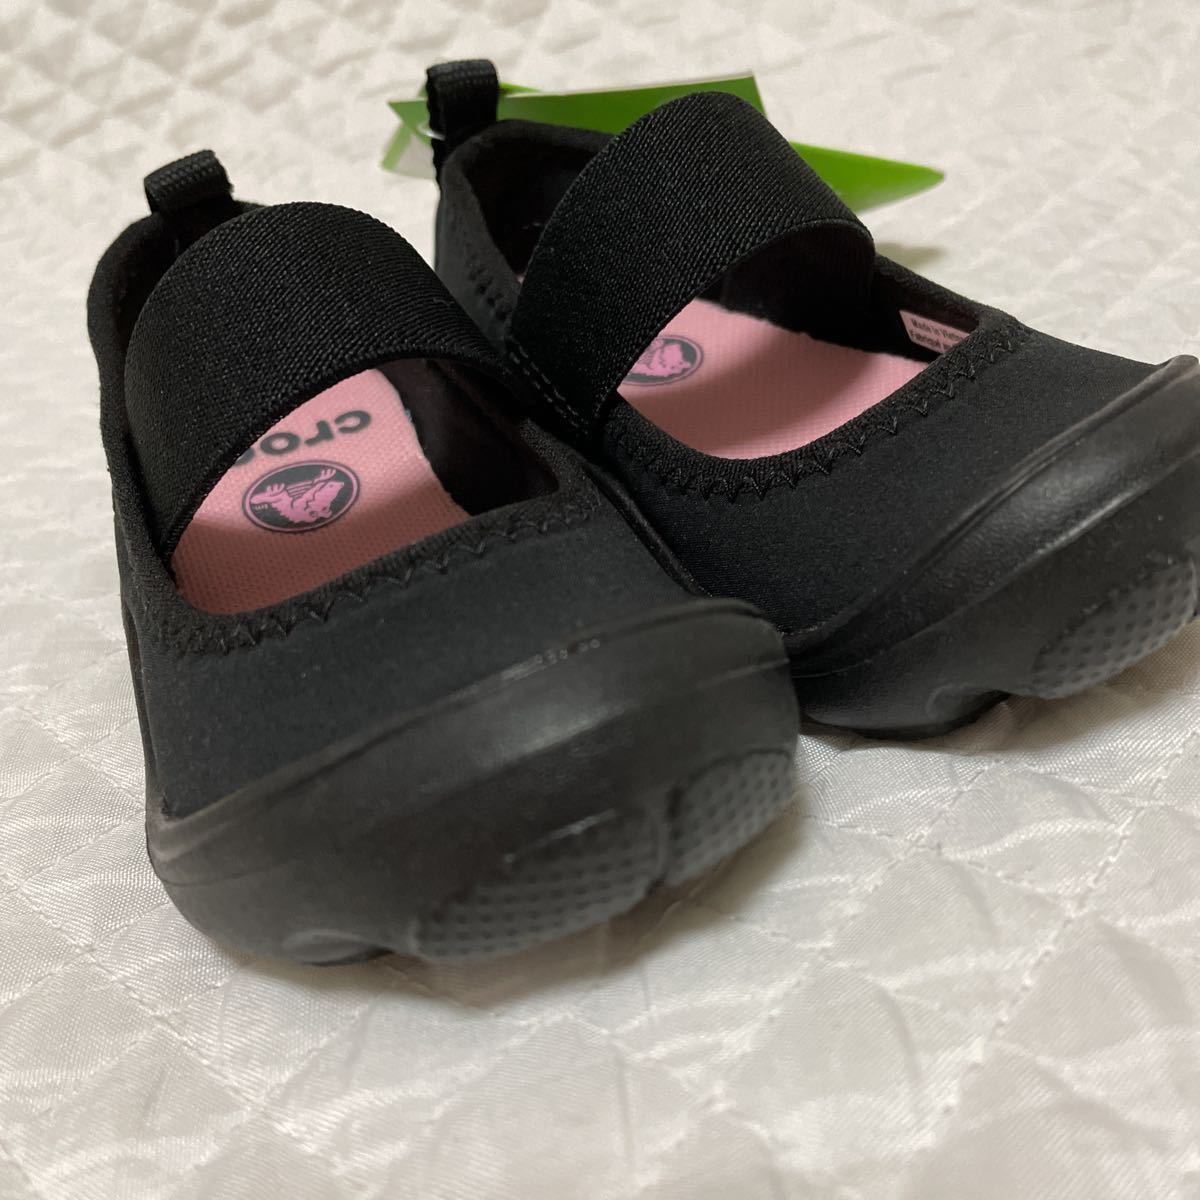  new goods 3740 jpy Crocs baby shoes 14cm black black unused tag attaching child care . child care place kindergarten girl man First shoes 